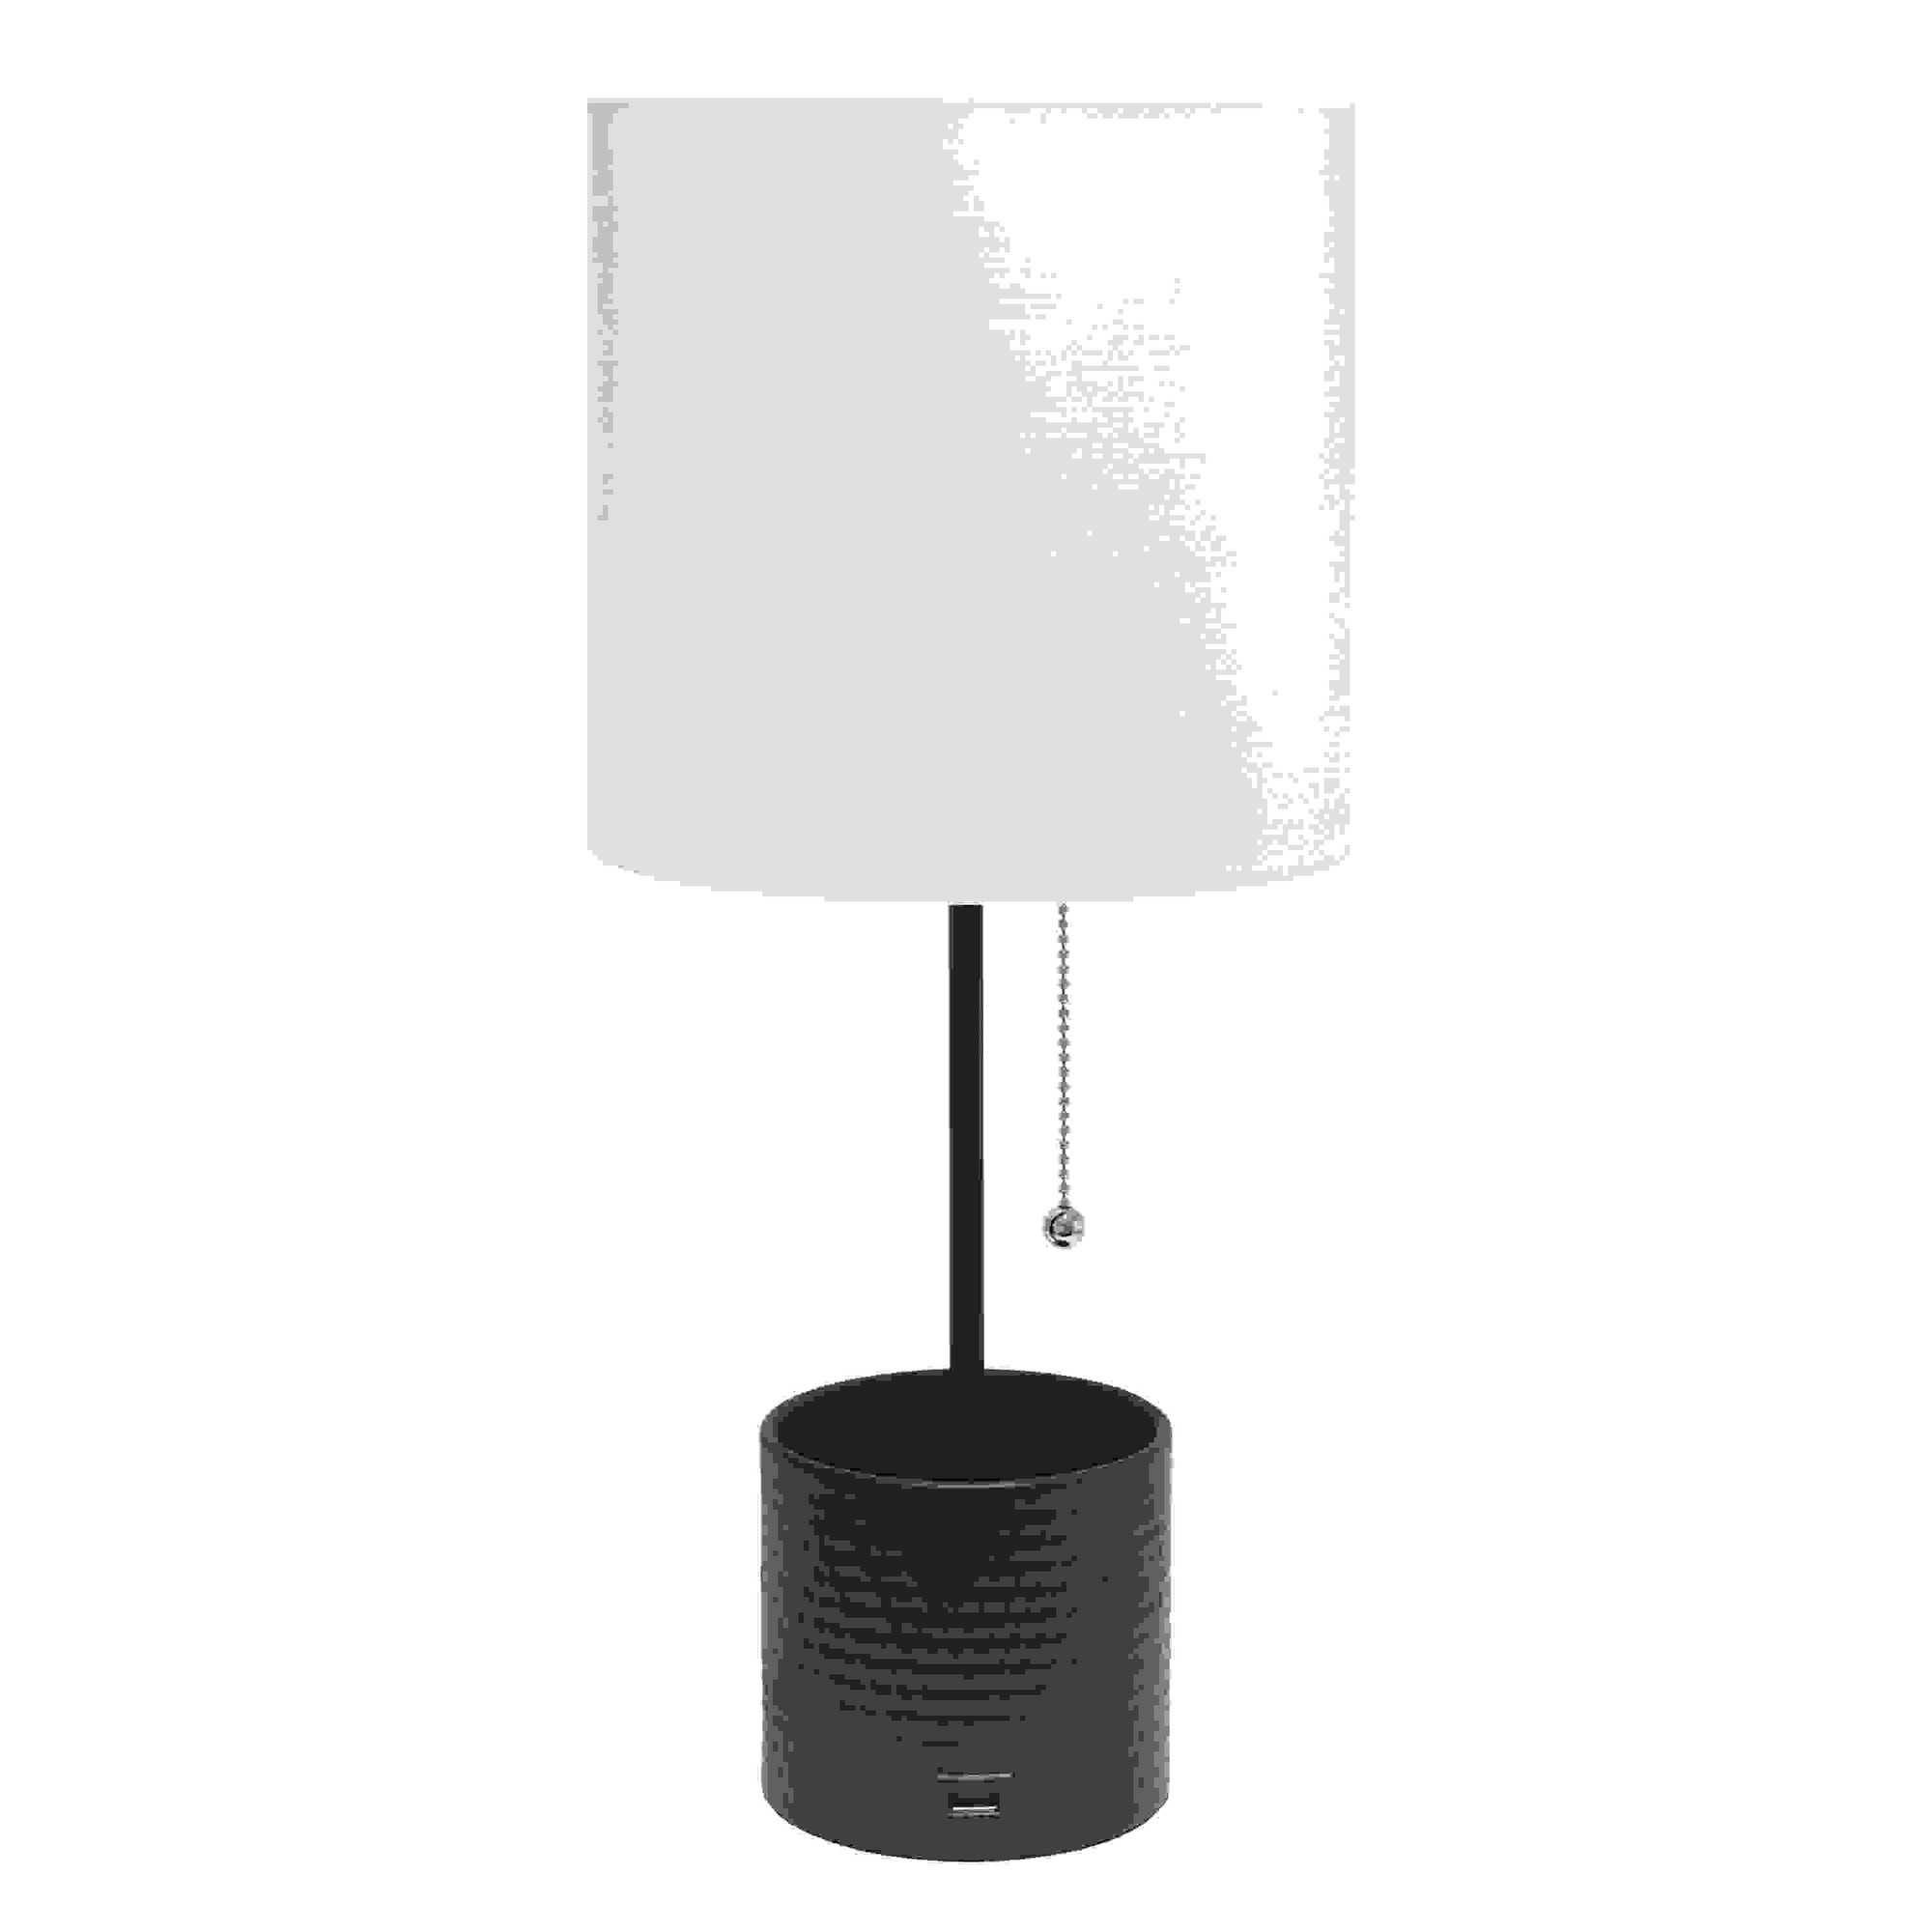 Simple Designs Hammered Metal Organizer Table Lamp with USB charging port and Fabric Shade, Black